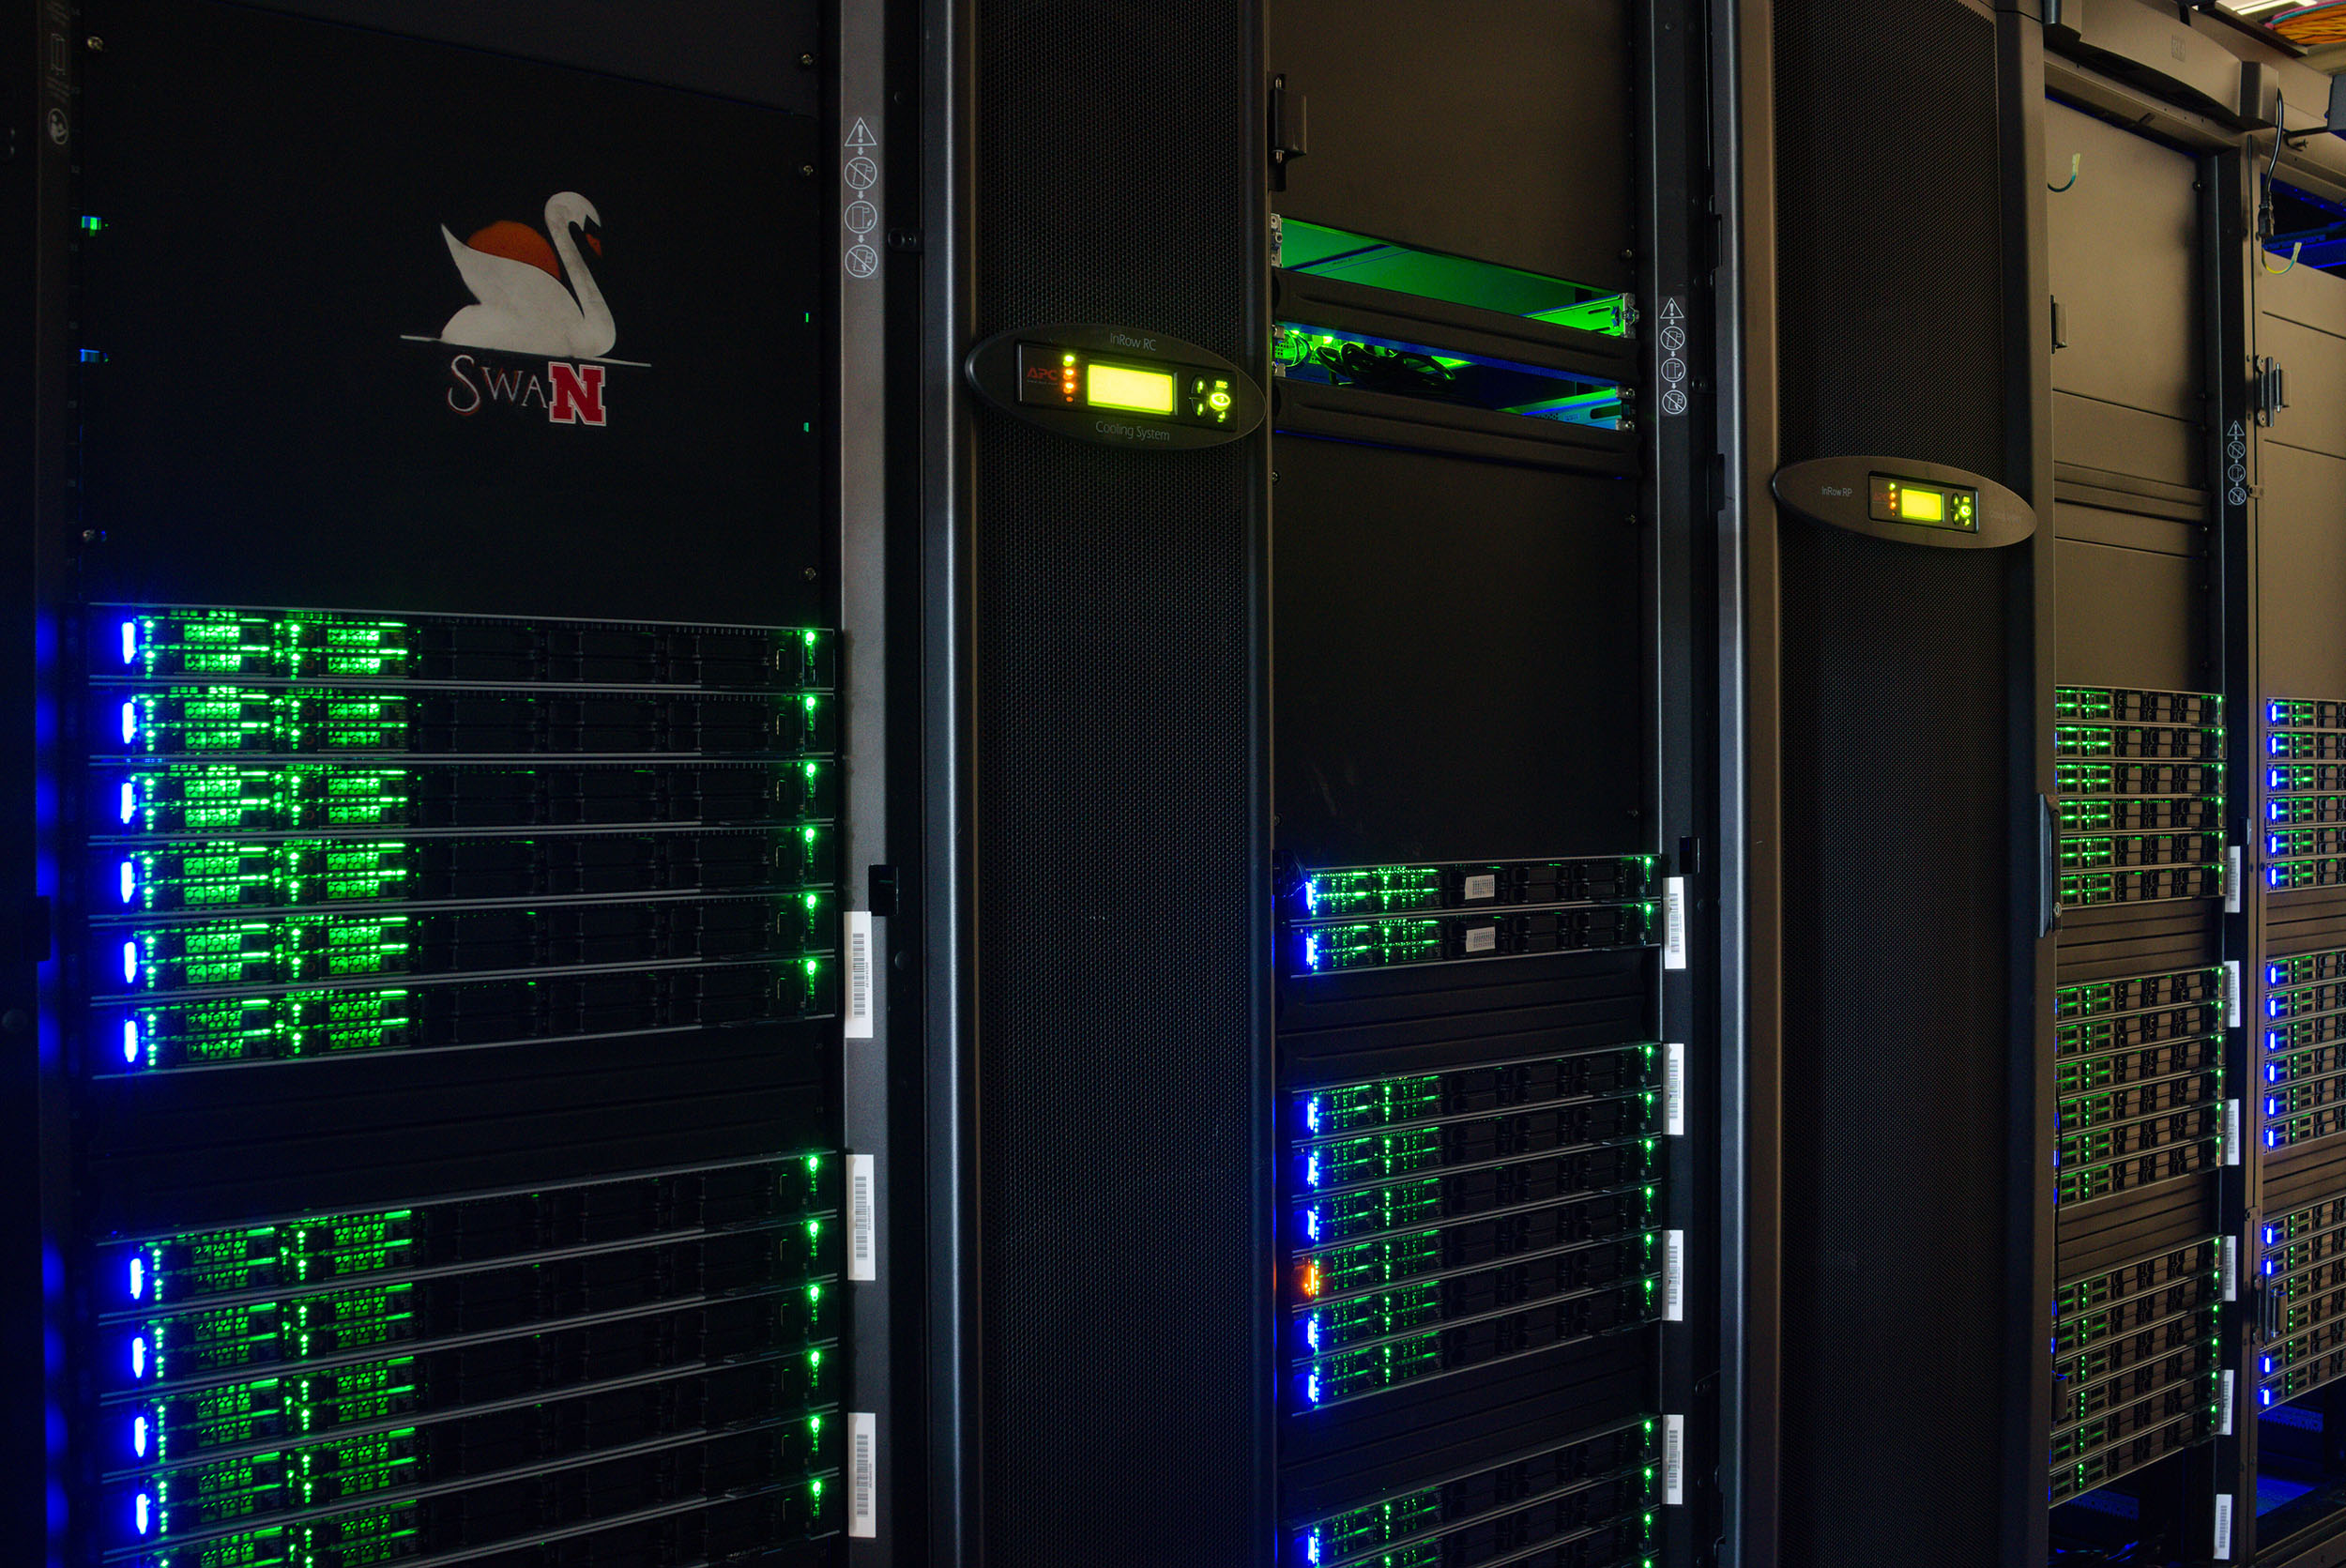 The Swan supercomputer in the Holland Computing Center is available at no cost to researchers, instructors and students. It is named in honor of David Swanson, the founding director of the computing center.